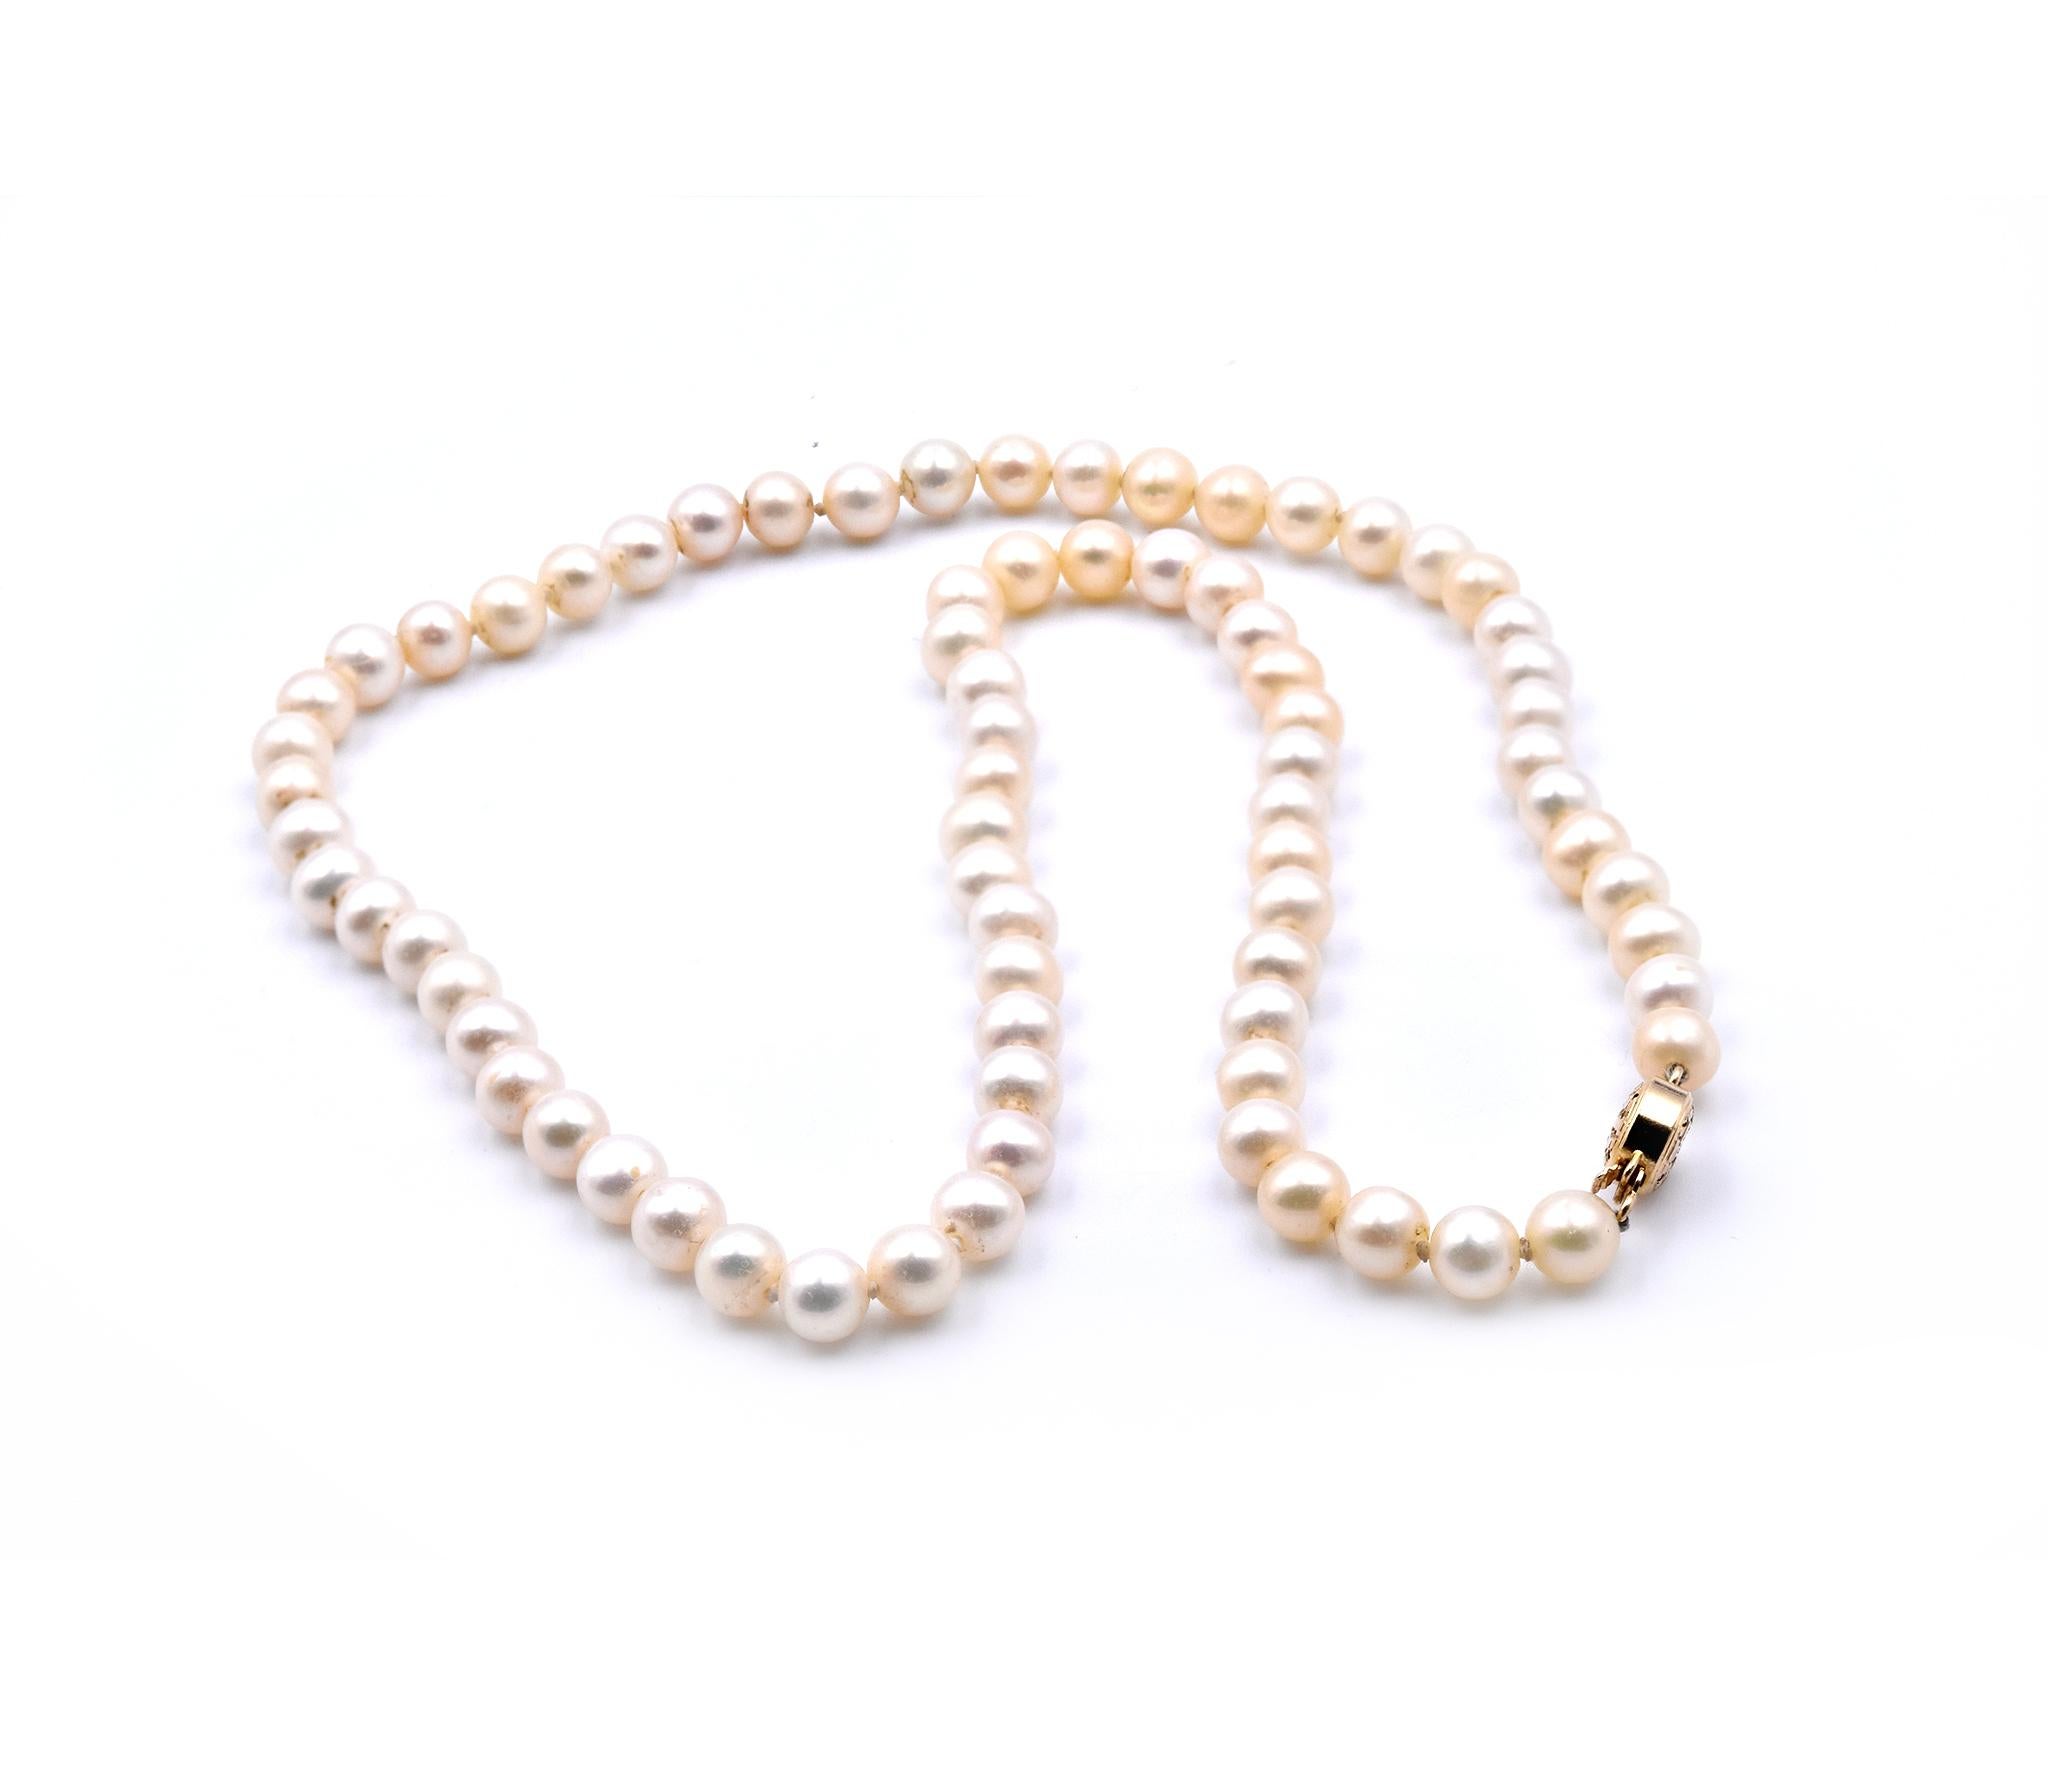 Round Cut Ivory Semi Round Pearl Strand Necklace with 14 Karat Yellow Gold Clasp For Sale